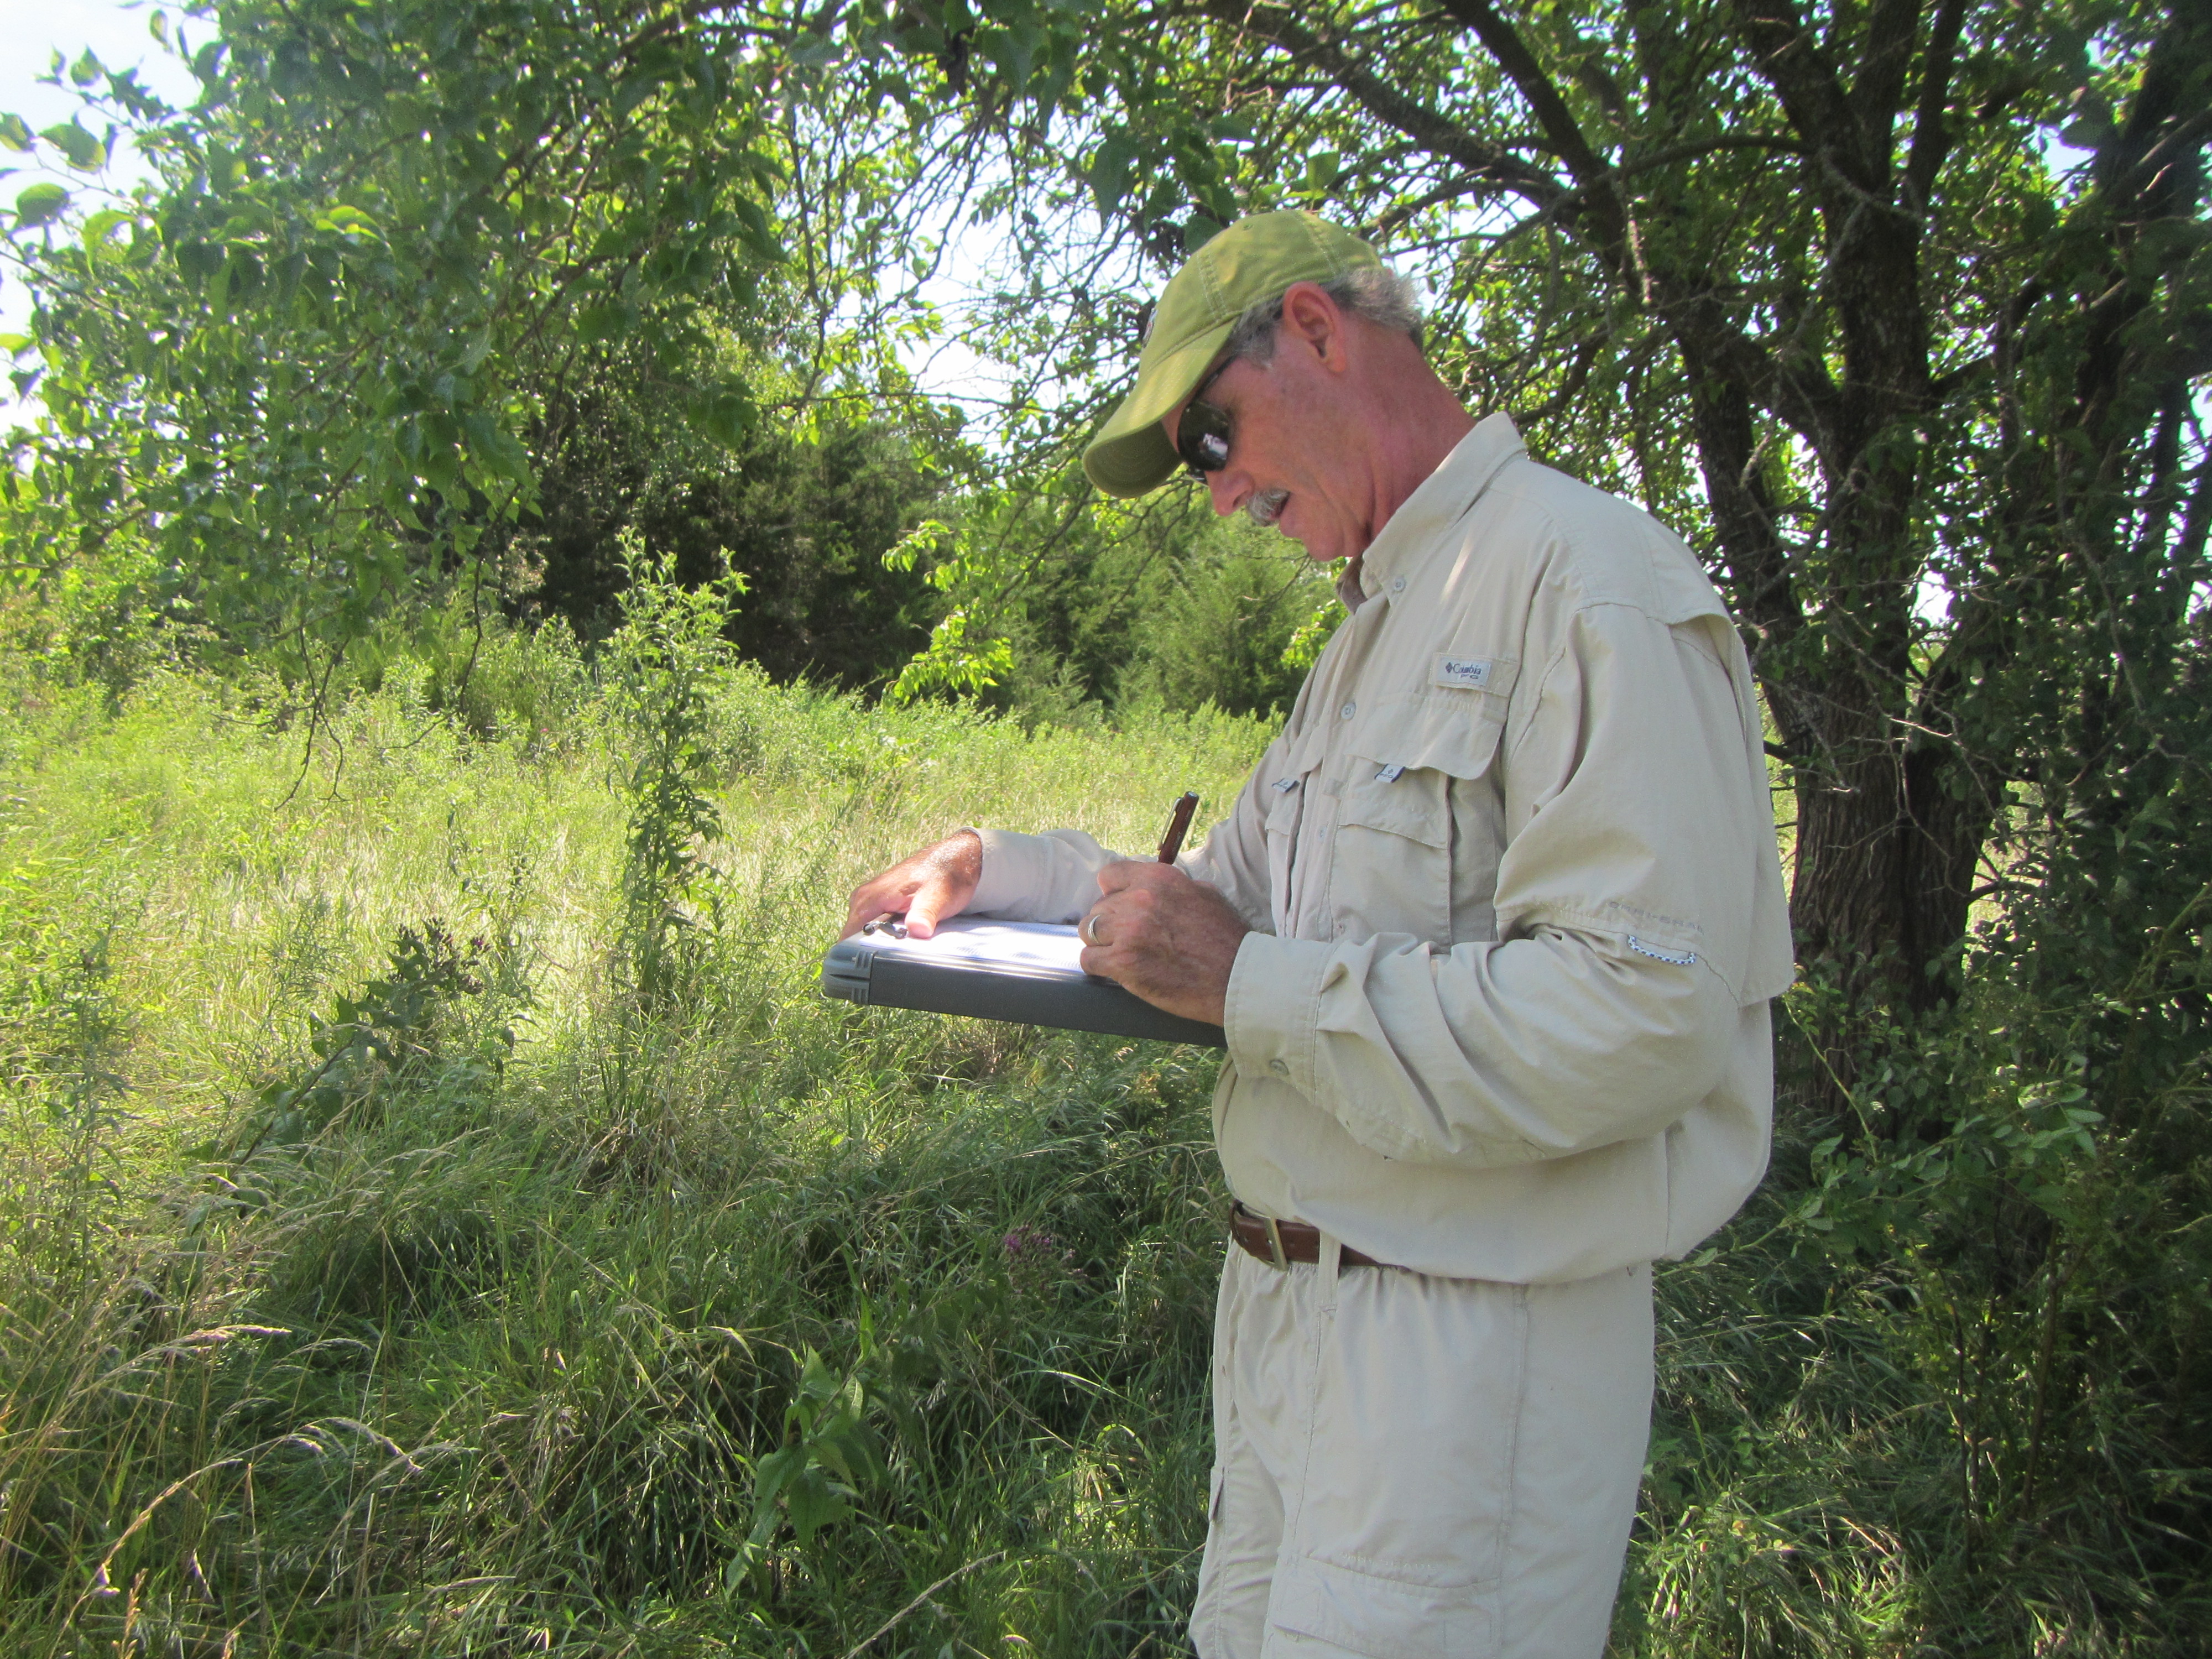 Dr. Craig Freeman records vegetation found around a farm pond in the Delaware River Watershed in Kansas.